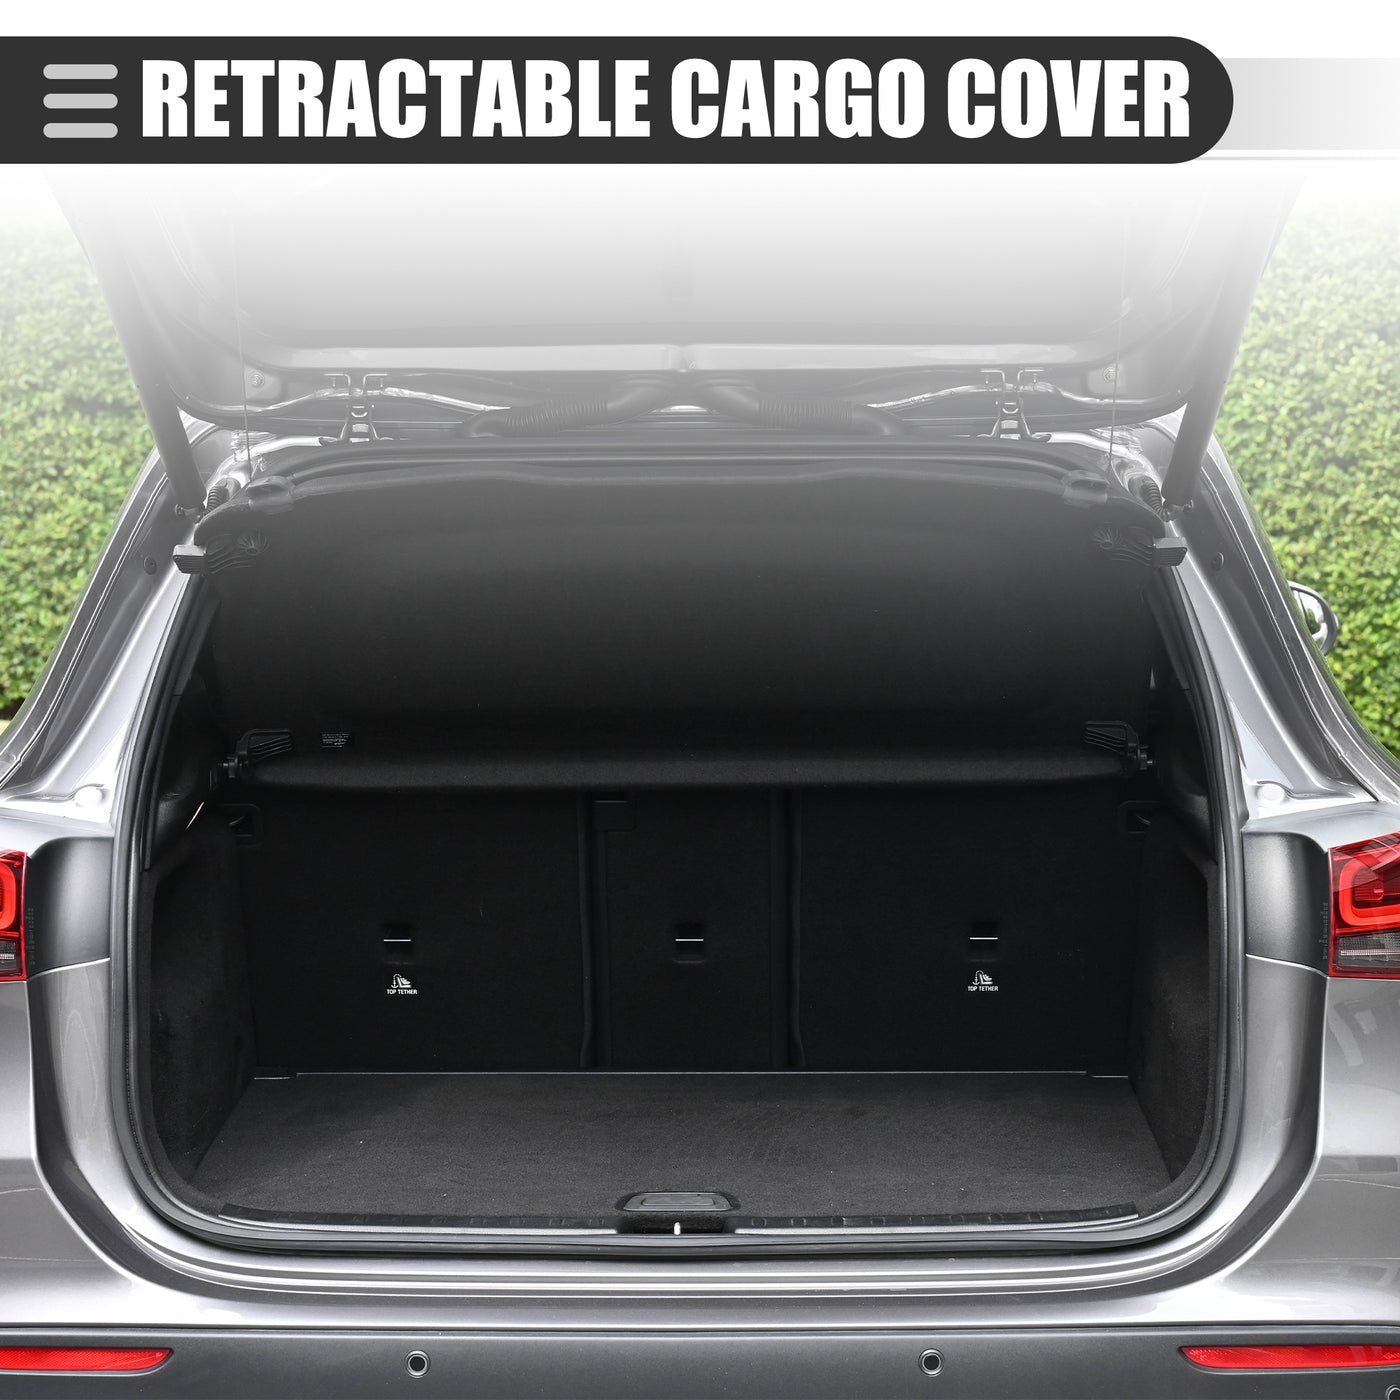 Motoforti Retractable Cargo Cover, Heat Resistant Rear Trunk Security Cover Shield Shade, for Mercedes Benz ML350 2012-2015, Waterproof Canvas, Black